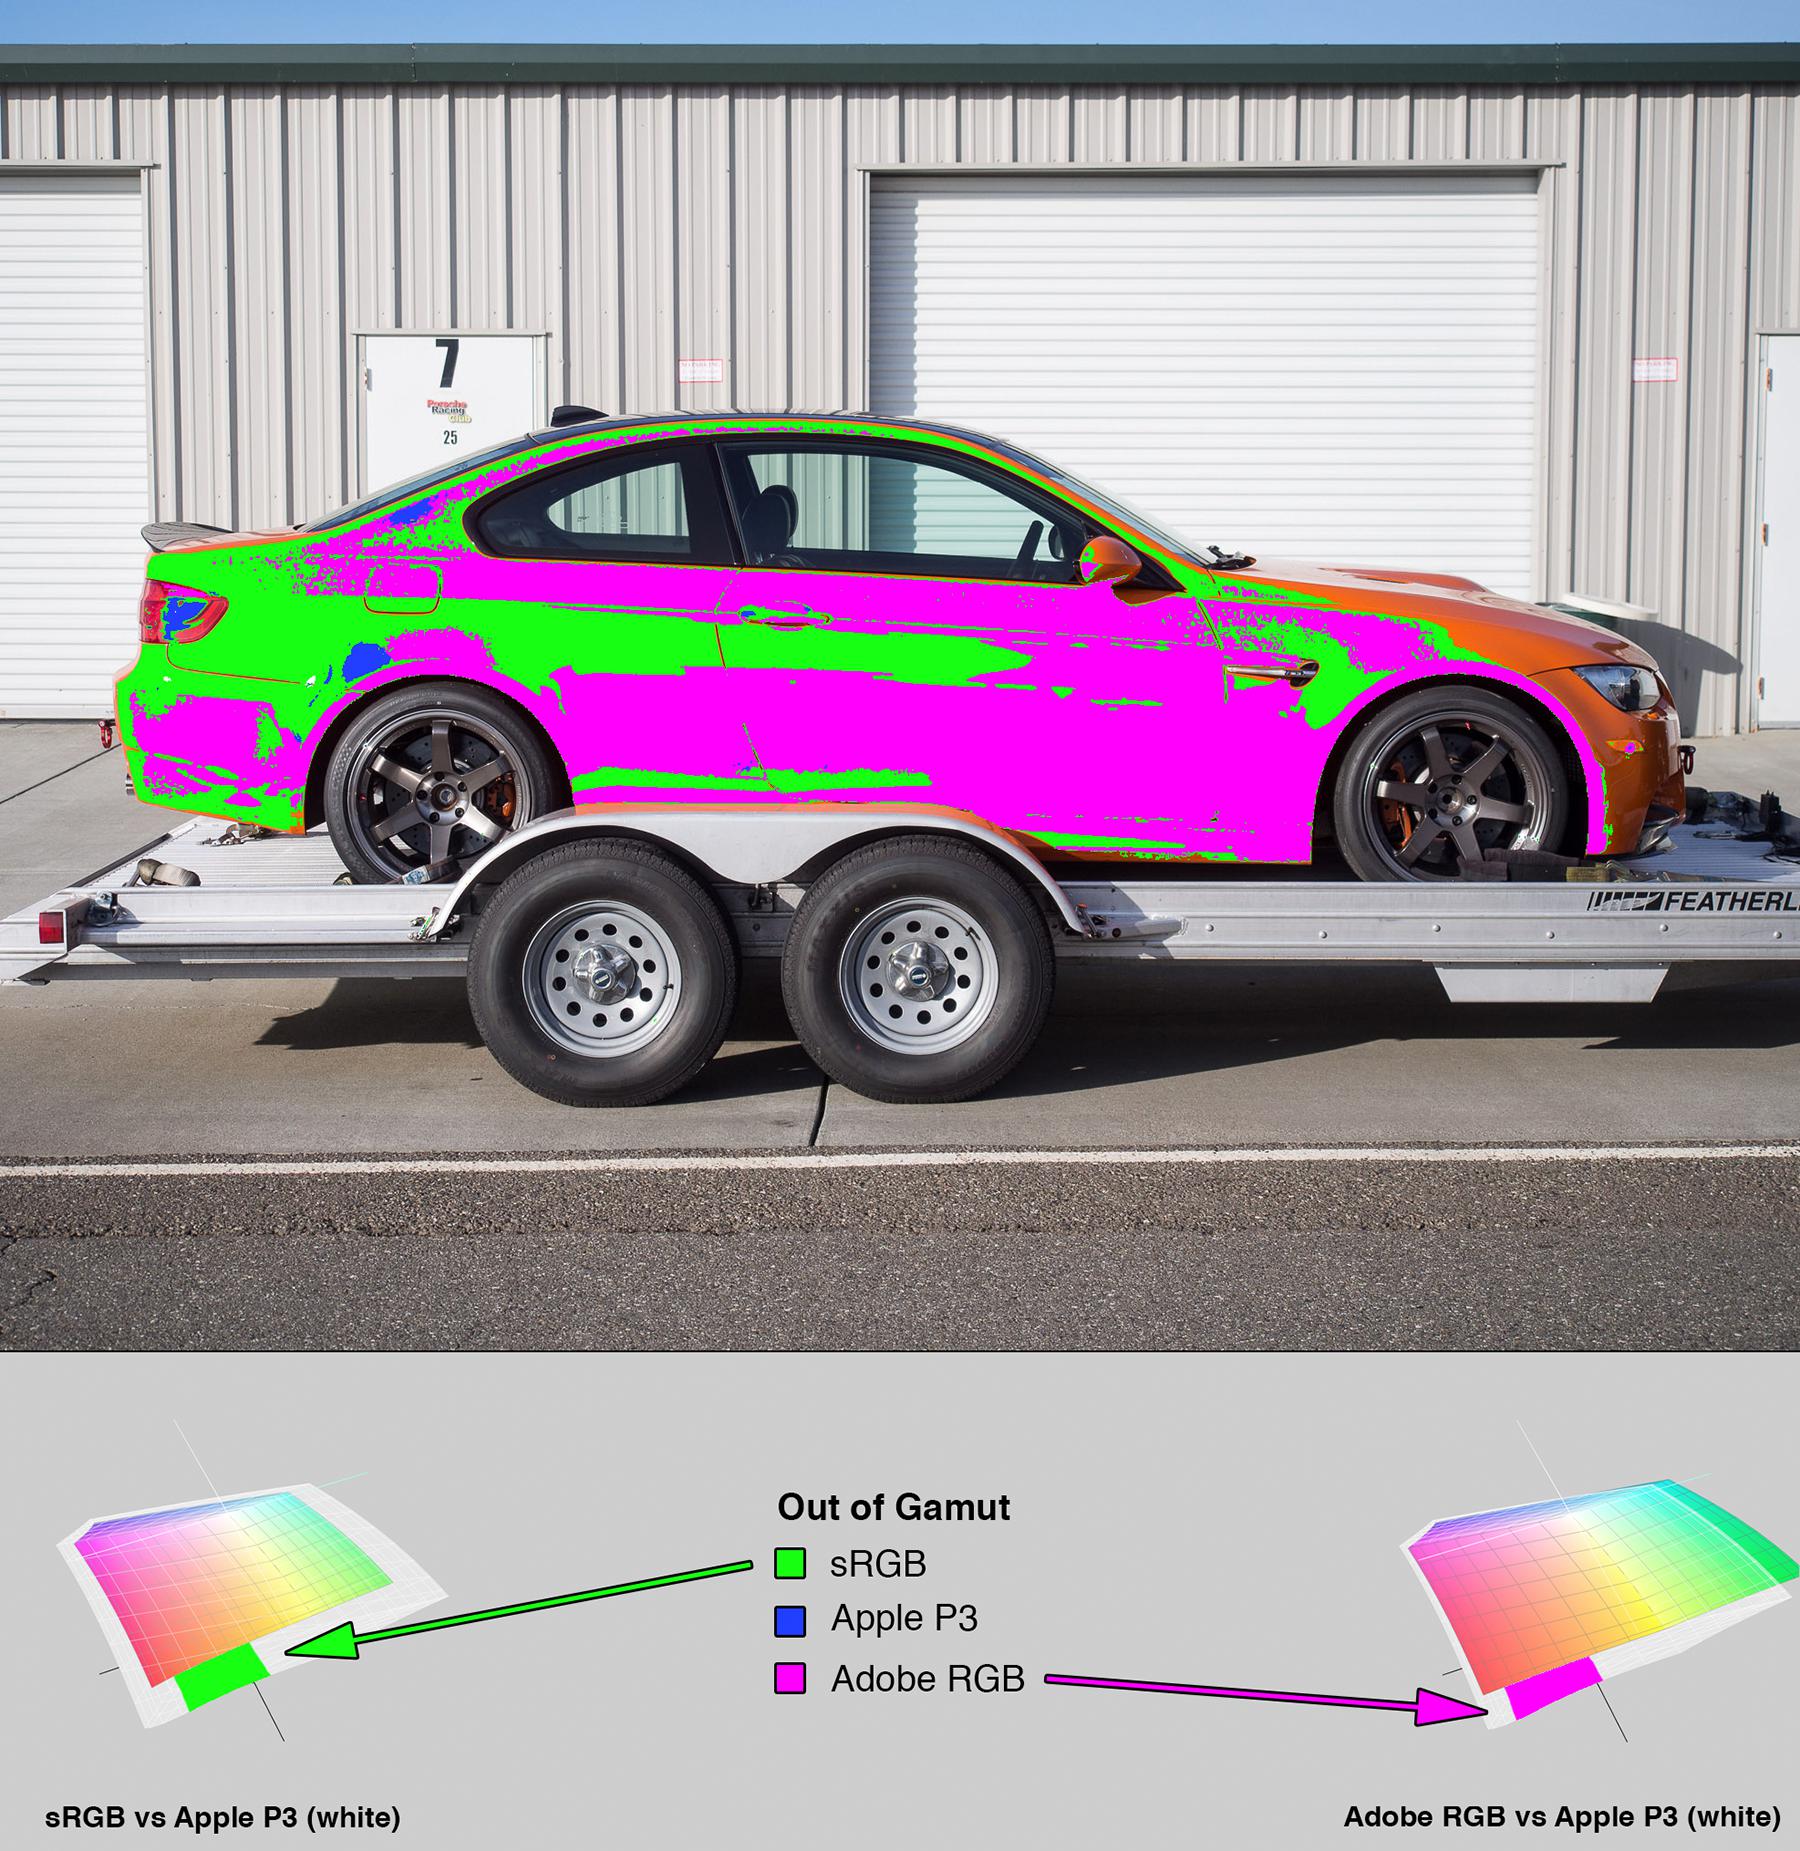 Car photo from Figure 5. Overlaid with a heat map indicating which ares of the image are out of gamut. At the bottom of the image is a section with 3D LAB plots showing how the colorspaces differ.